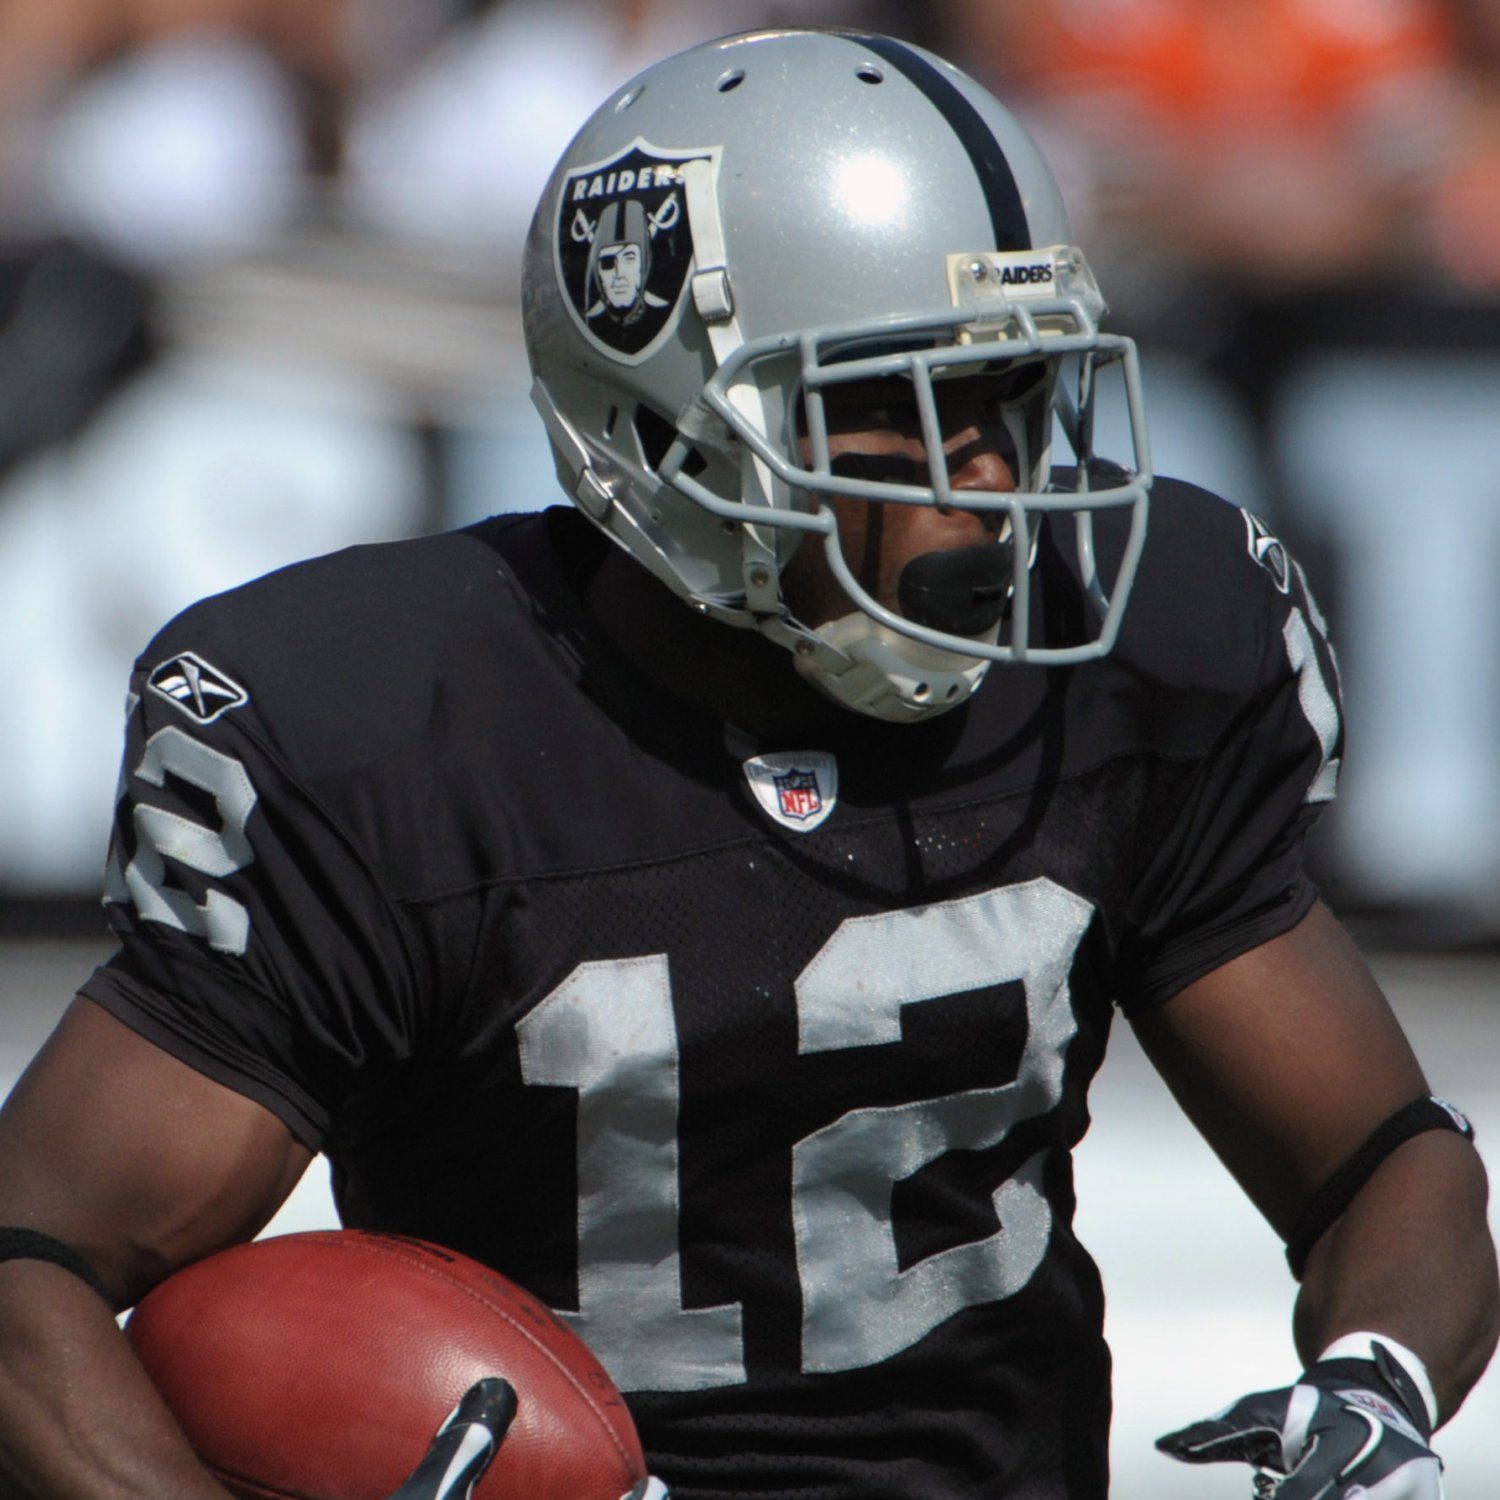 Jacoby ford injury report #3